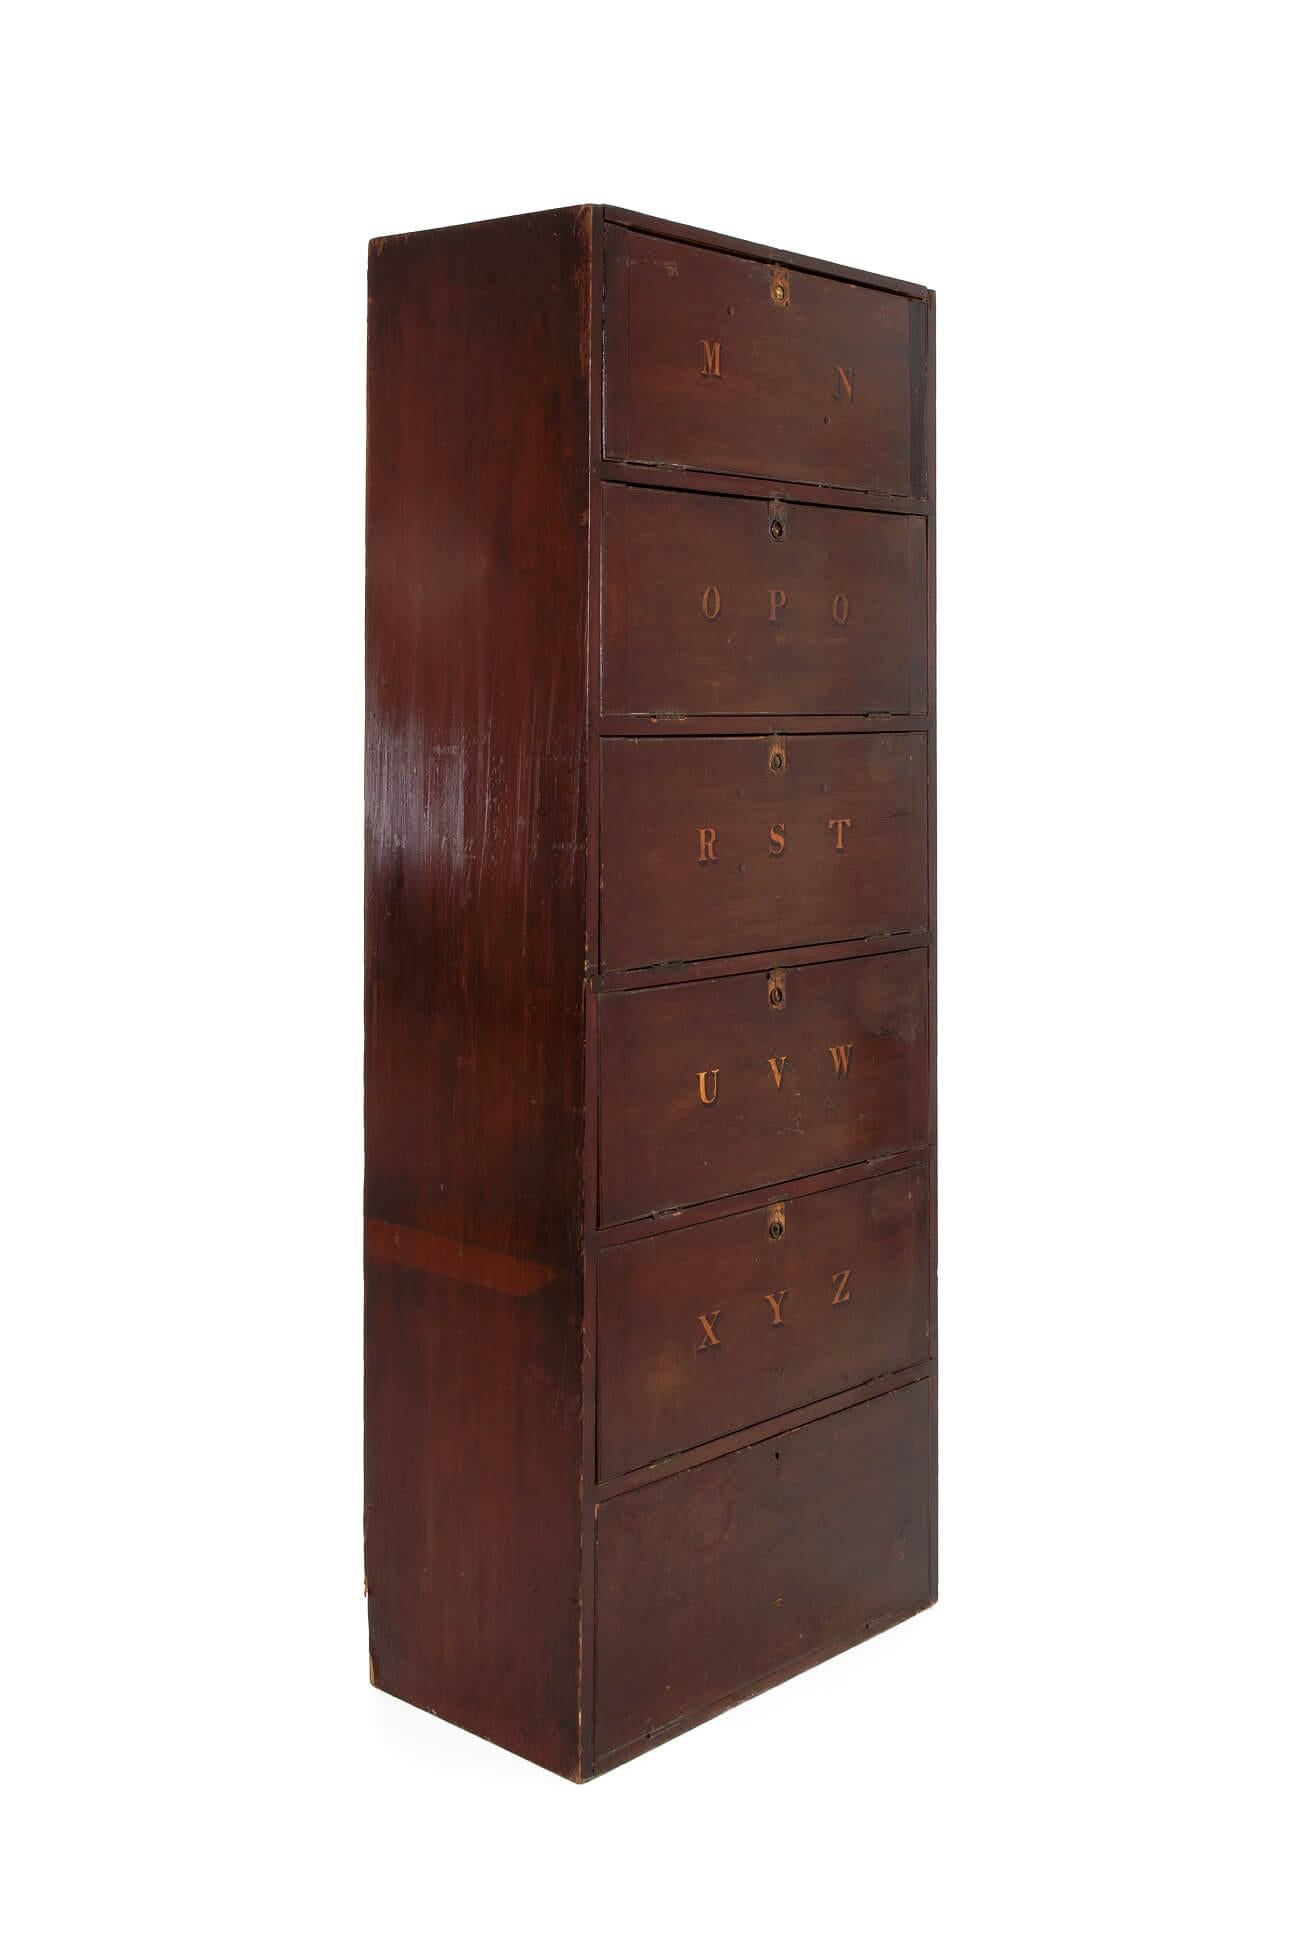 A wonderful legal clerks filing cabinet or deed box in painted pine. In original condition with six hinged shelves and hand-painted alphabetical doors. 
English, circa 1900.

Additional information:
H 182.50 cm (H 71.8 inches)
W 68.5 cm (W 26.9